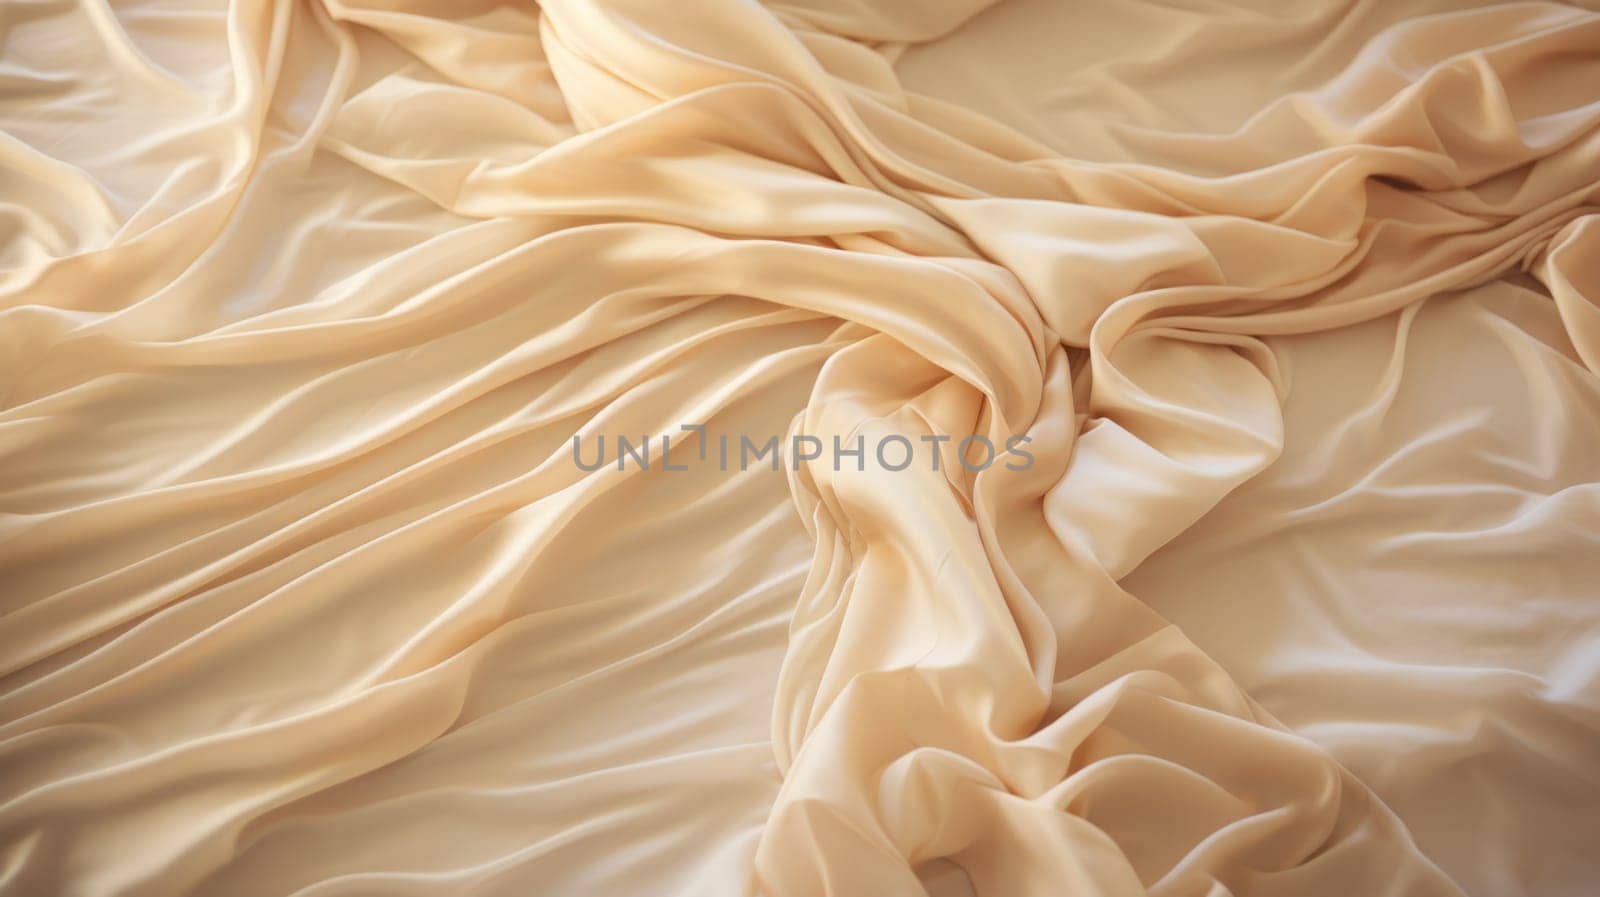 A close up of a piece of fabric that is draped, AI by starush